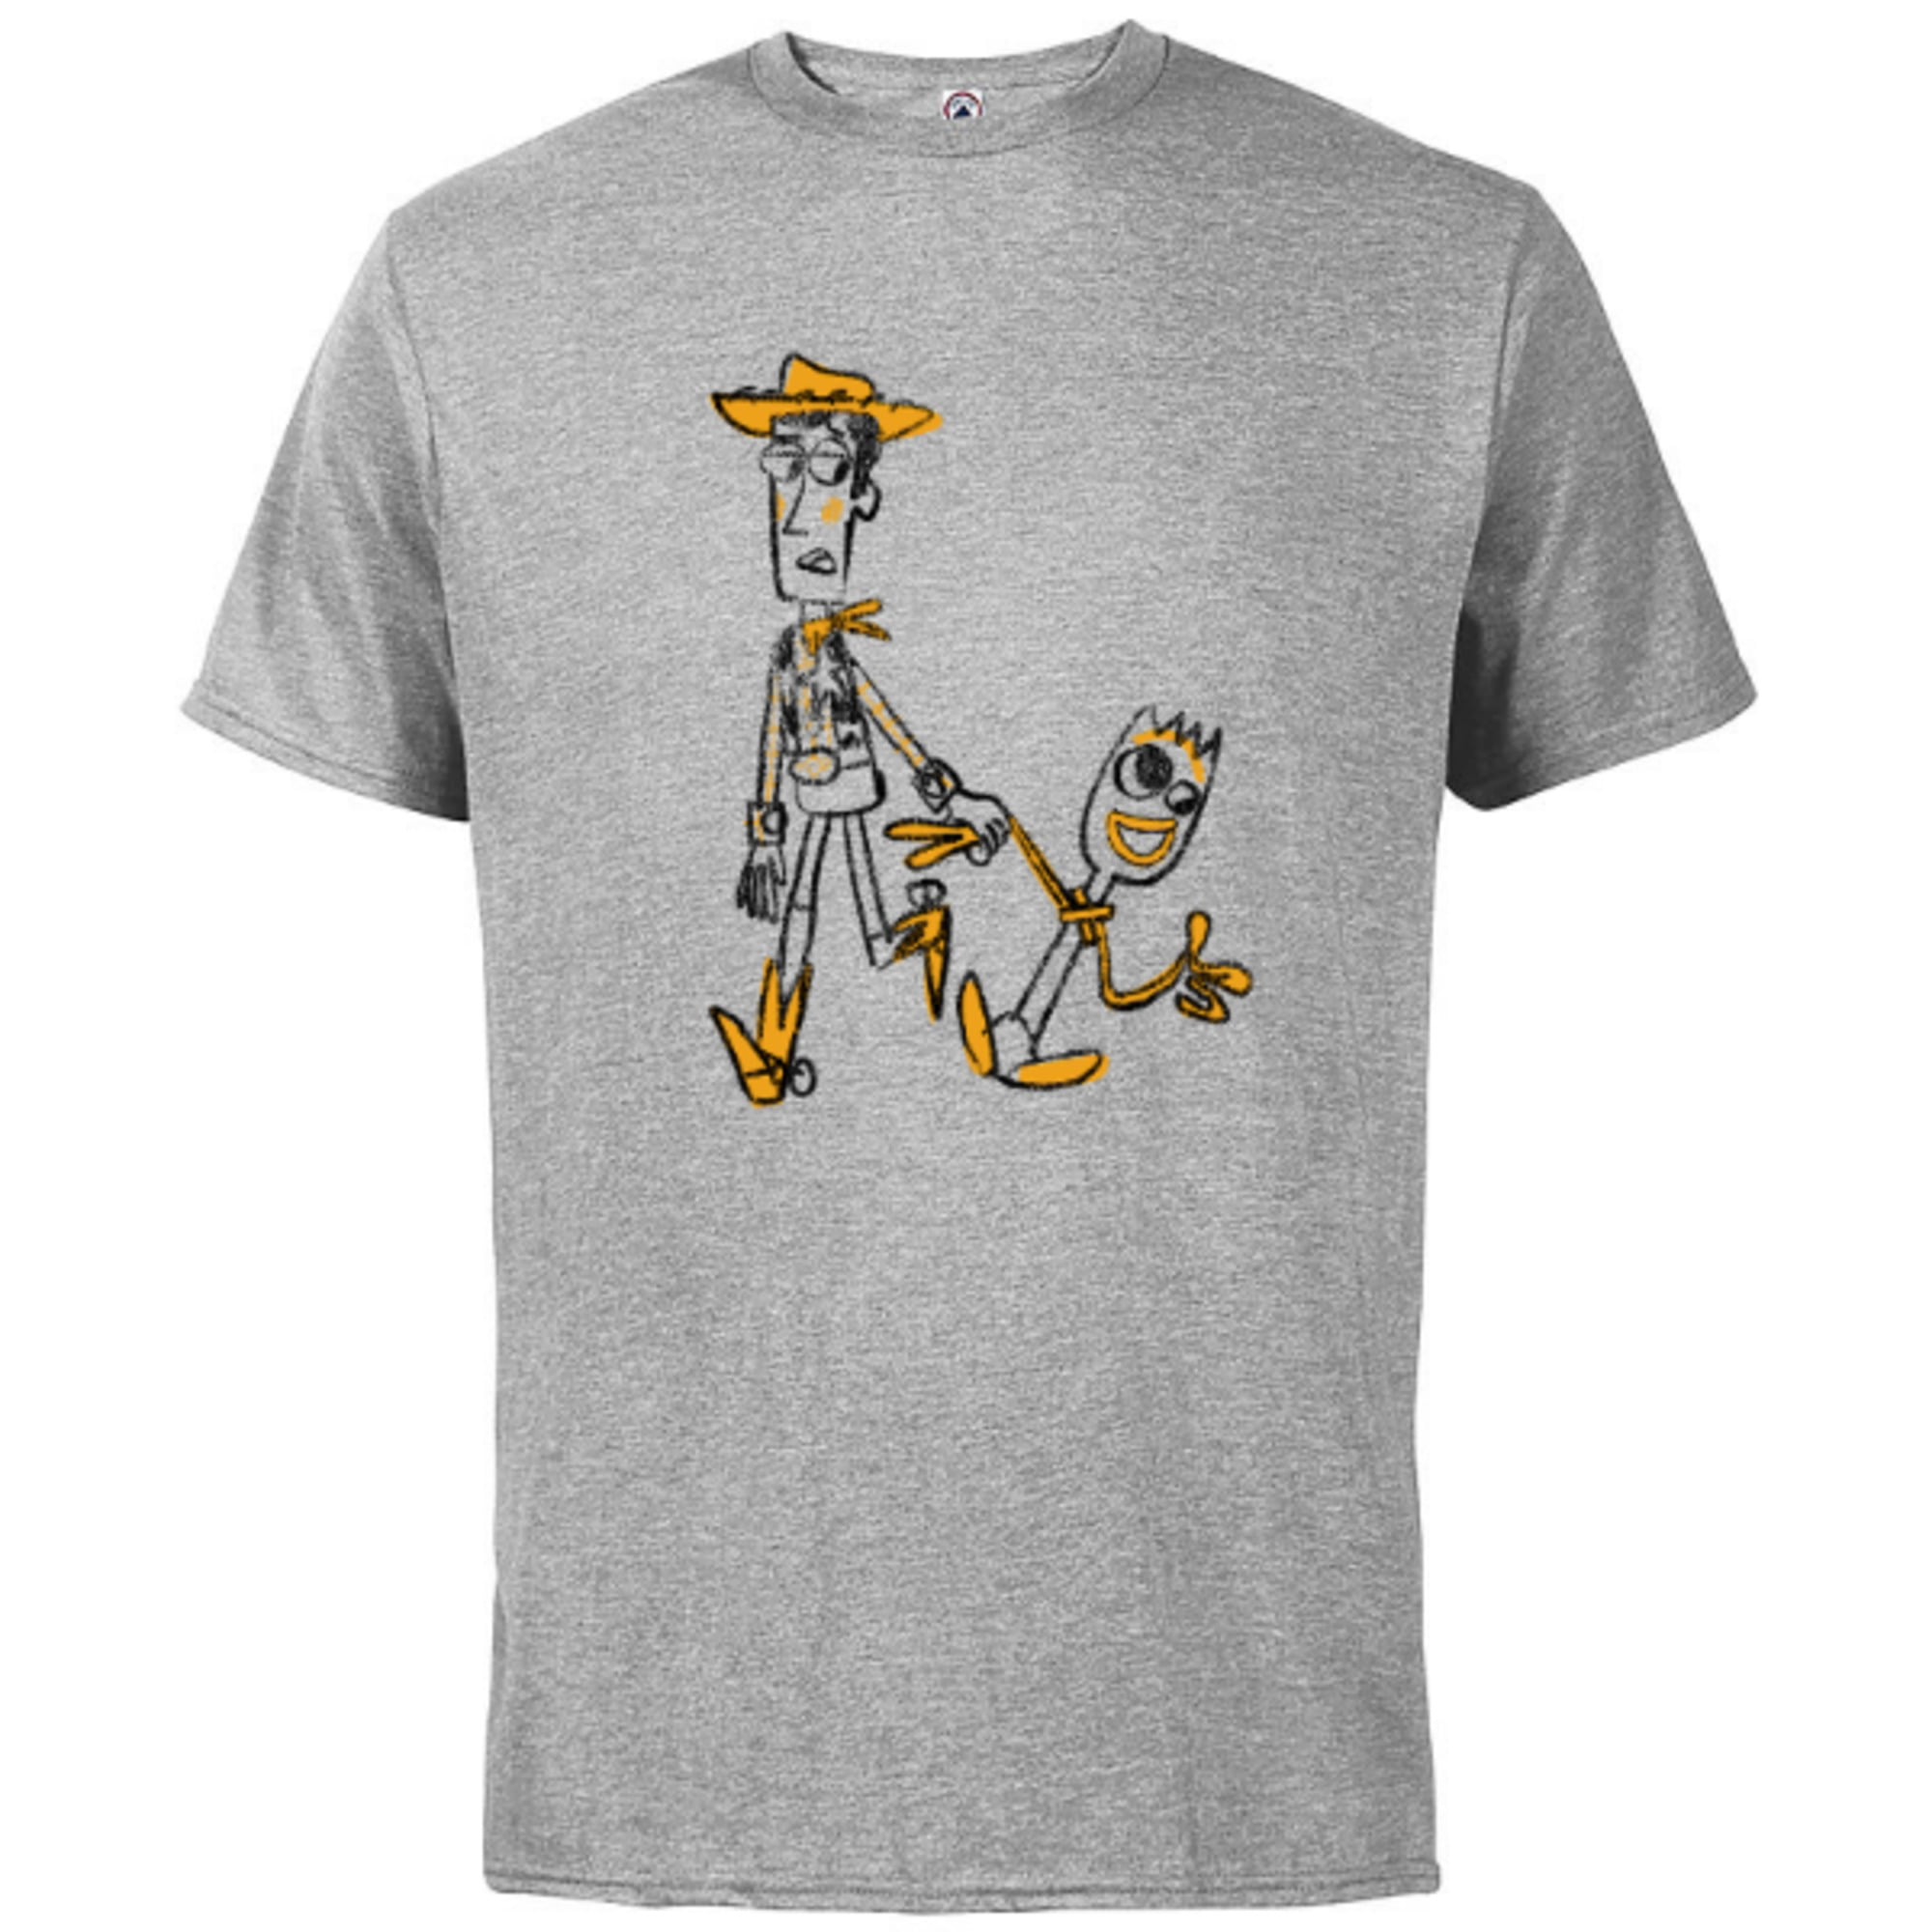 mens and Childrens Disney Pixar Toy Story 4 Forky T-shirt Ladies 